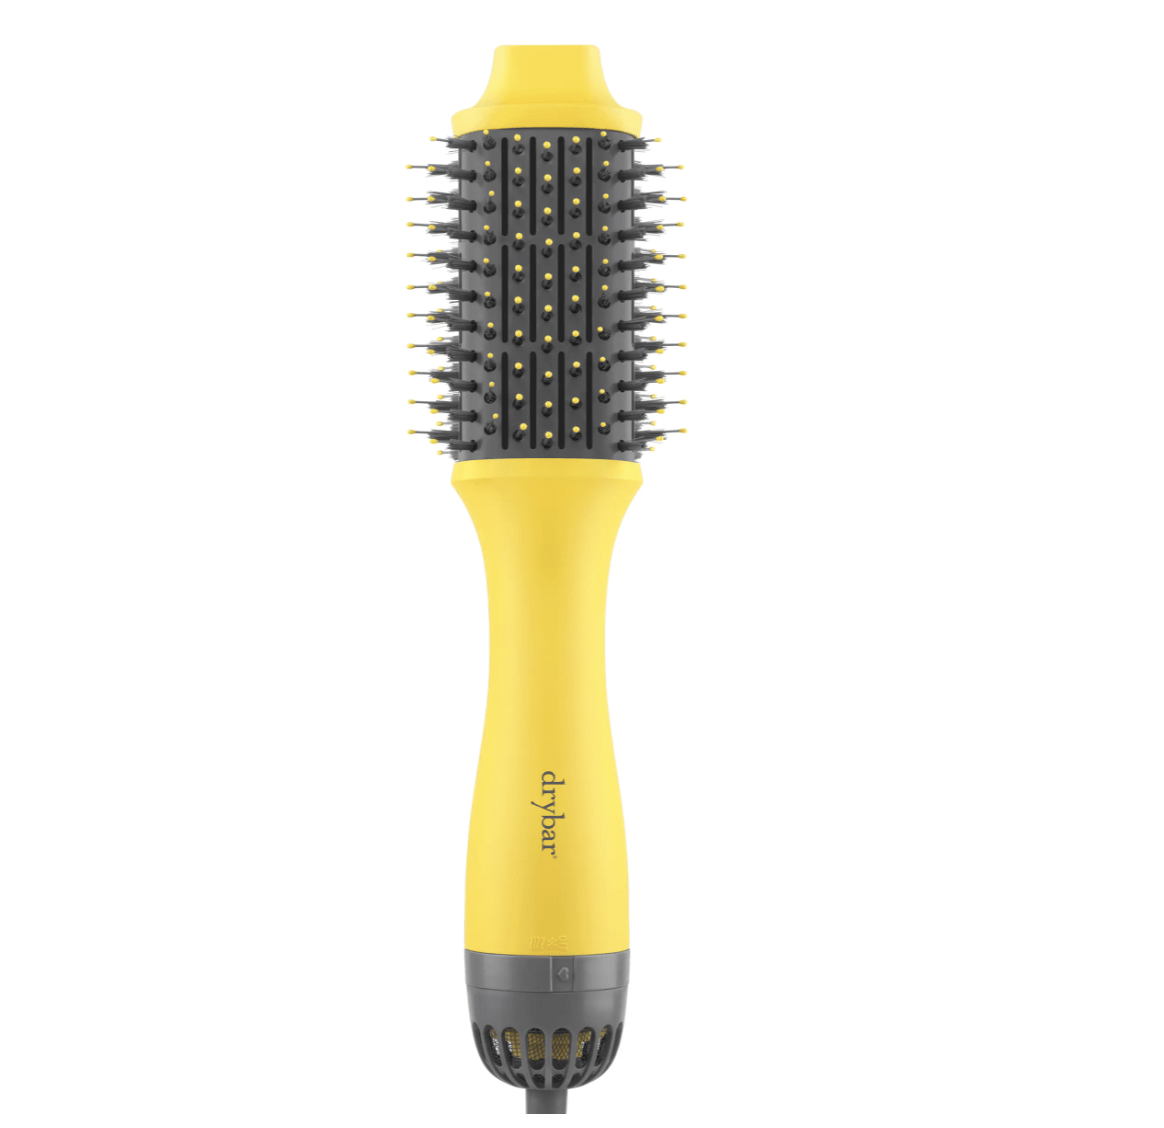 New and Notable: Latest from Drybar, Schick, TRUFF and more